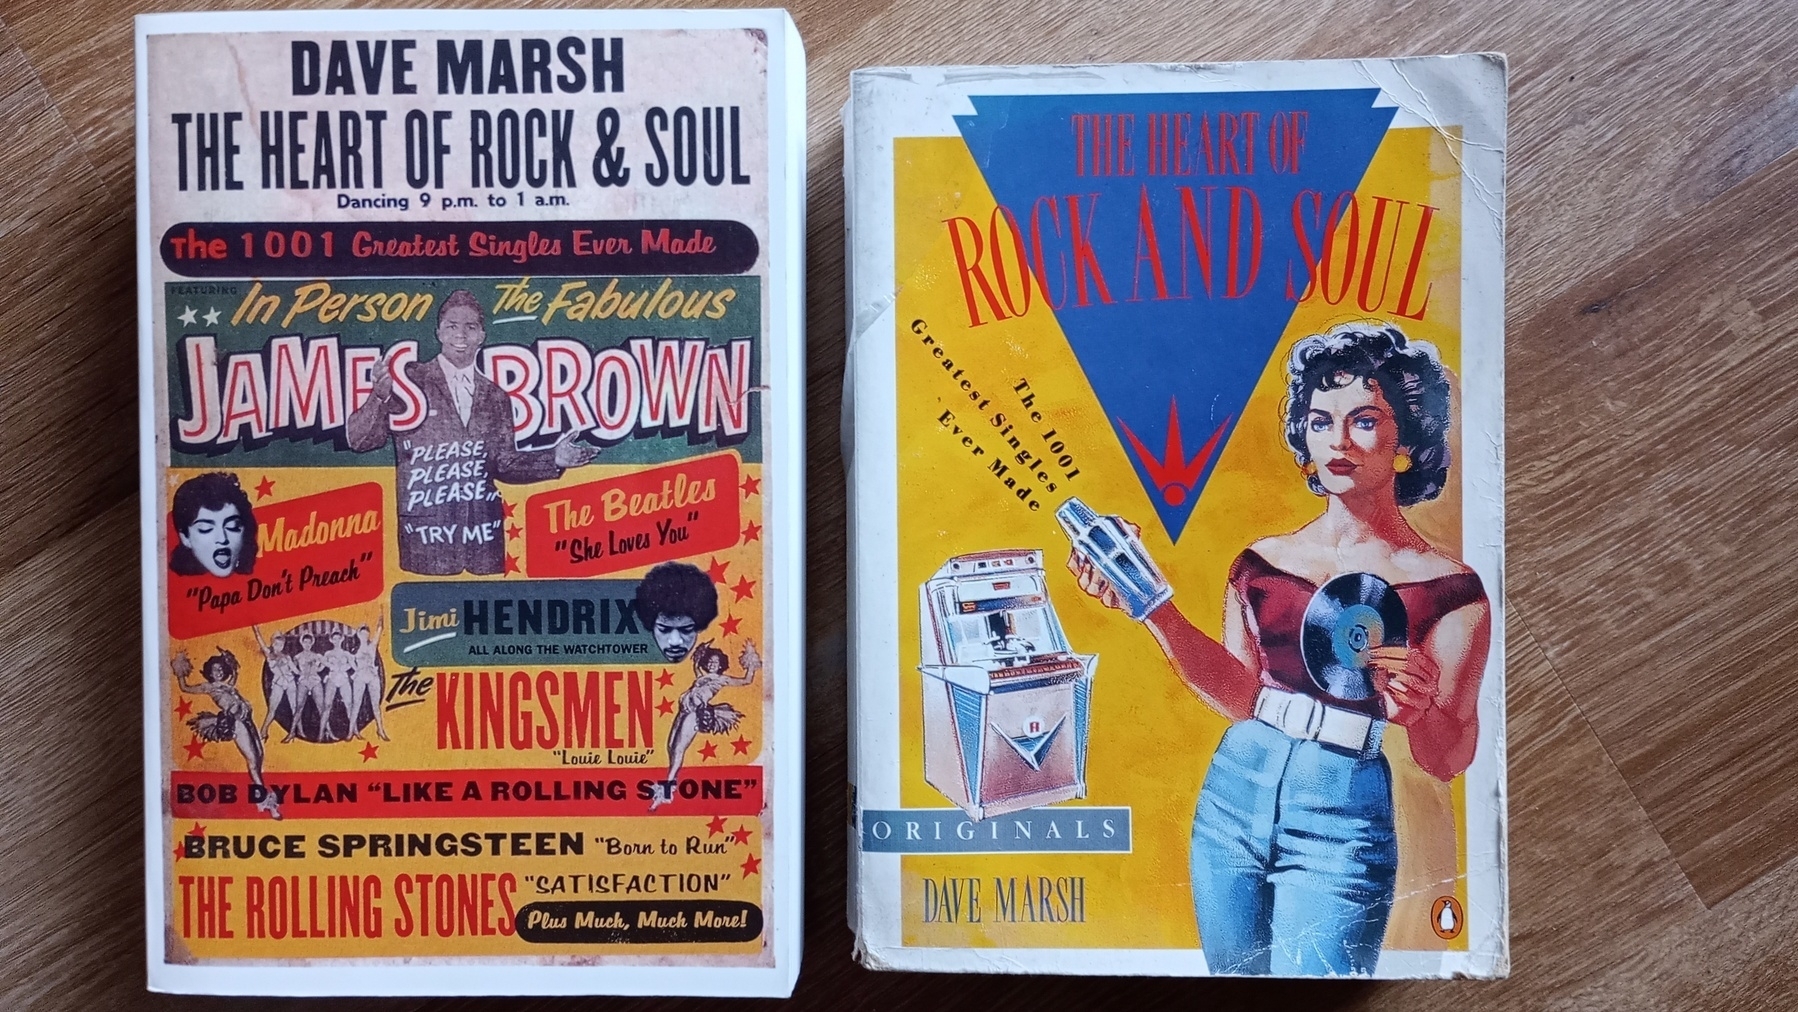 Dave Marsh's The Heart of Rock and Soul - the original edition looking battered and bruised and a comparatively pristine newer version